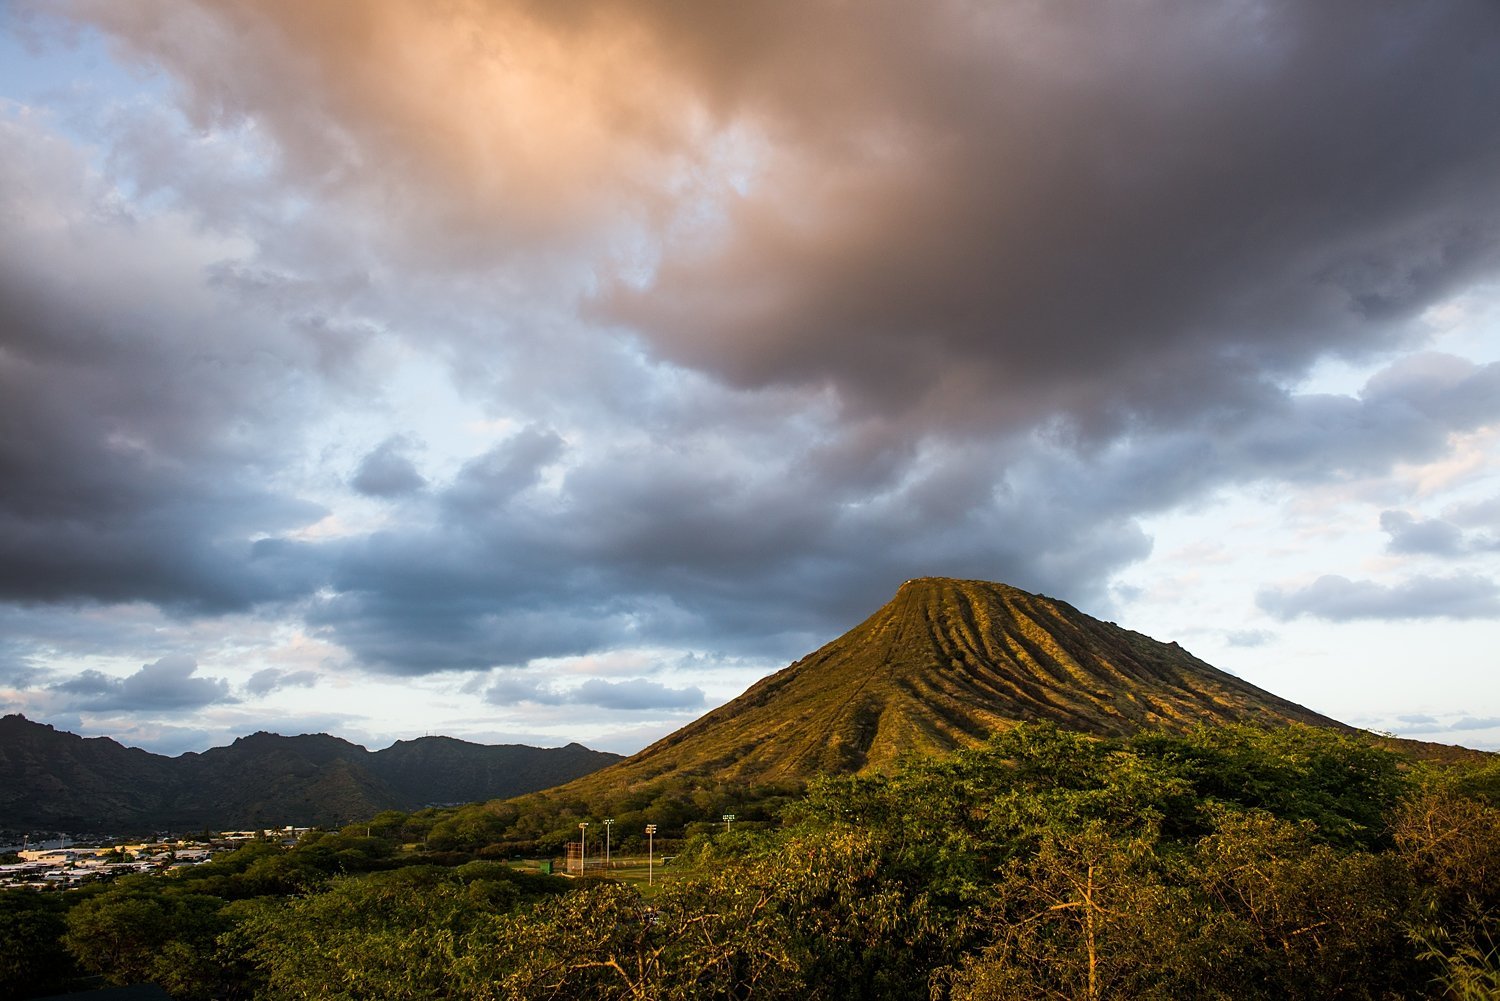 Sunset and dramatic clouds over Koko Head in Hawaii